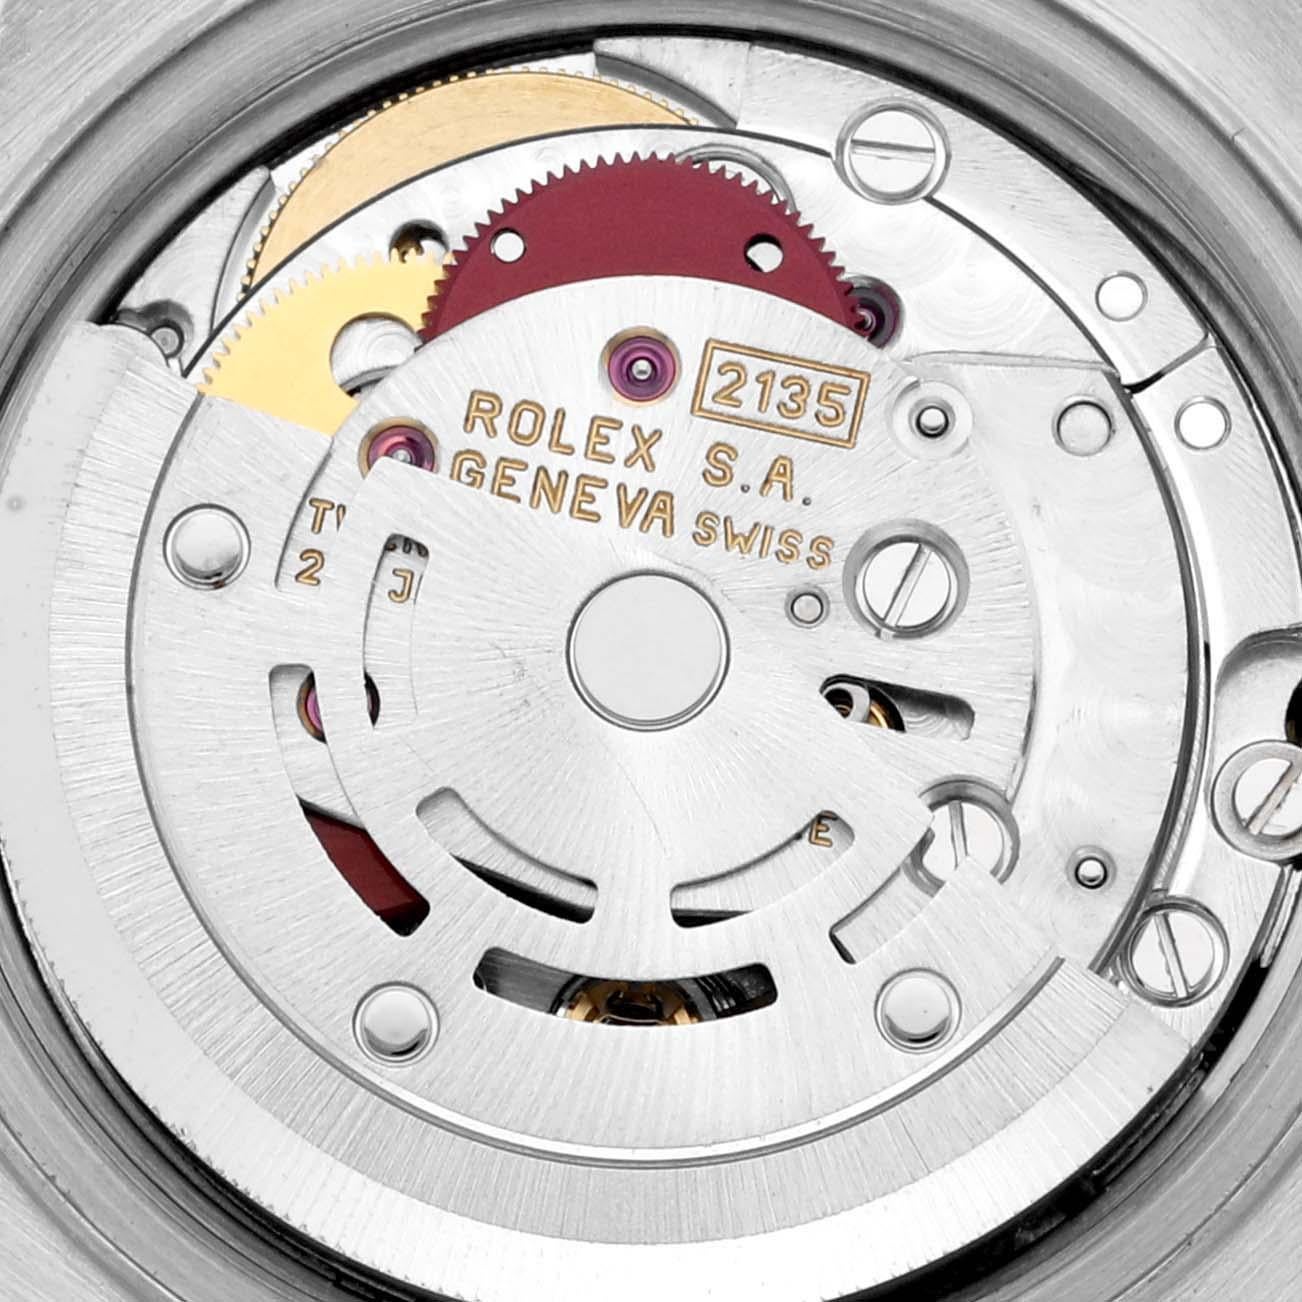 Rolex Datejust Mother Of Pearl Dial Steel Yellow Gold Ladies Watch 69173 Box Papers. Officially certified chronometer automatic self-winding movement. Stainless steel oyster case 26.0 mm in diameter. Rolex logo on the crown. 18k yellow gold fluted